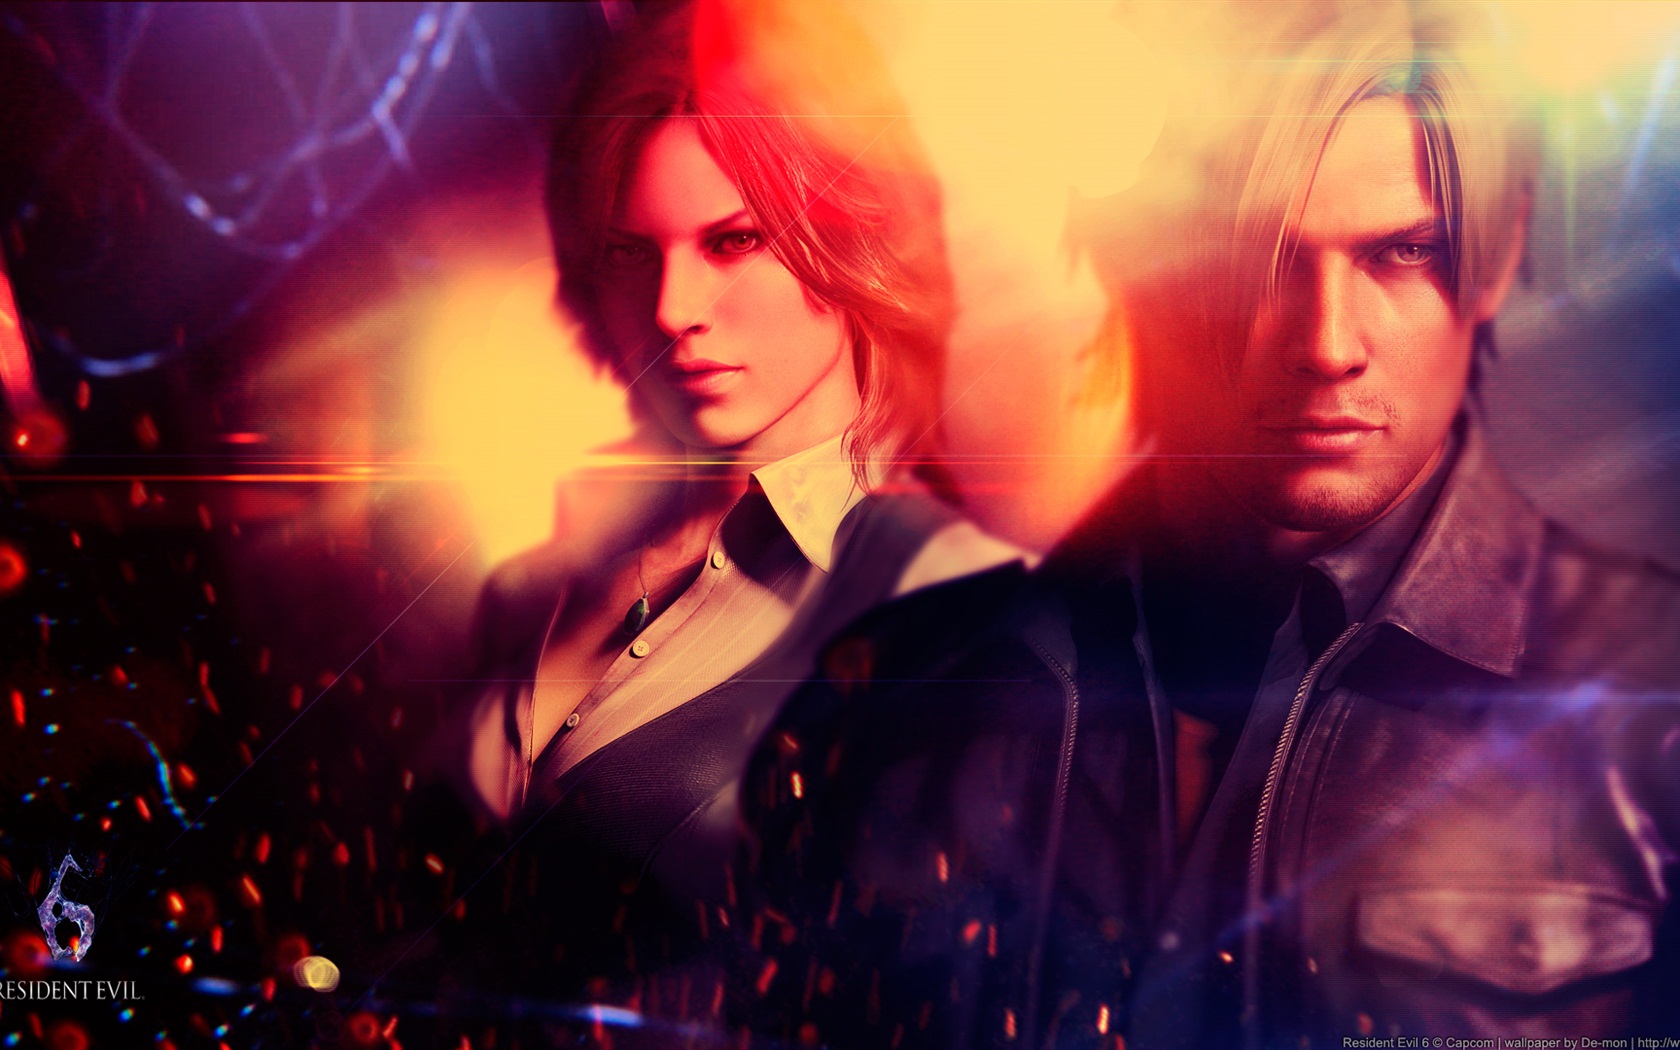 Resident Evil 6 HD game wallpapers #8 - 1680x1050